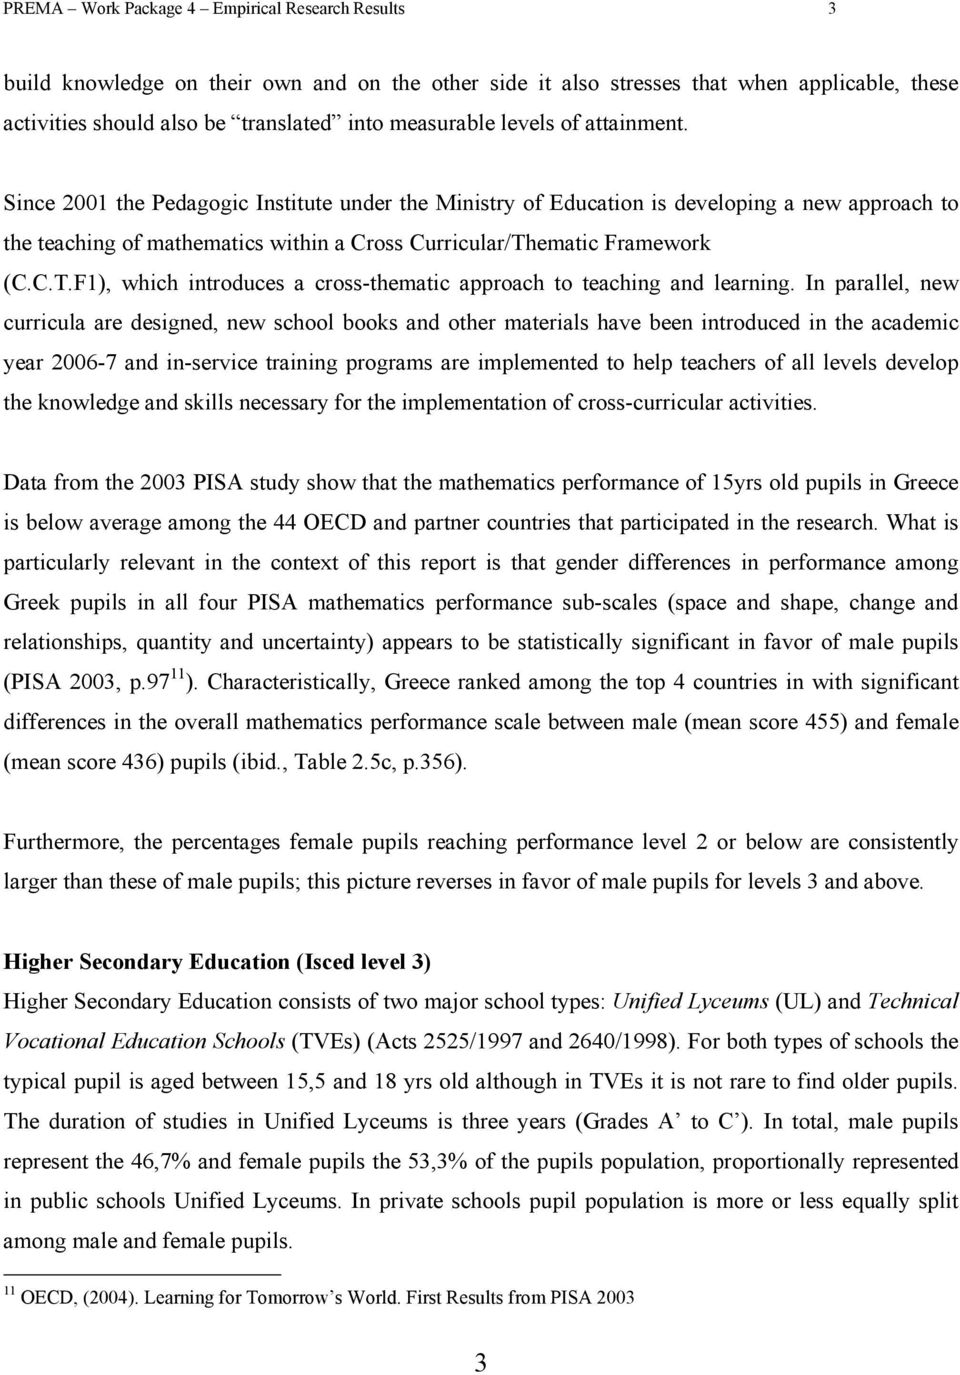 ematic Framework (C.C.T.F1), which introduces a cross-thematic approach to teaching and learning.